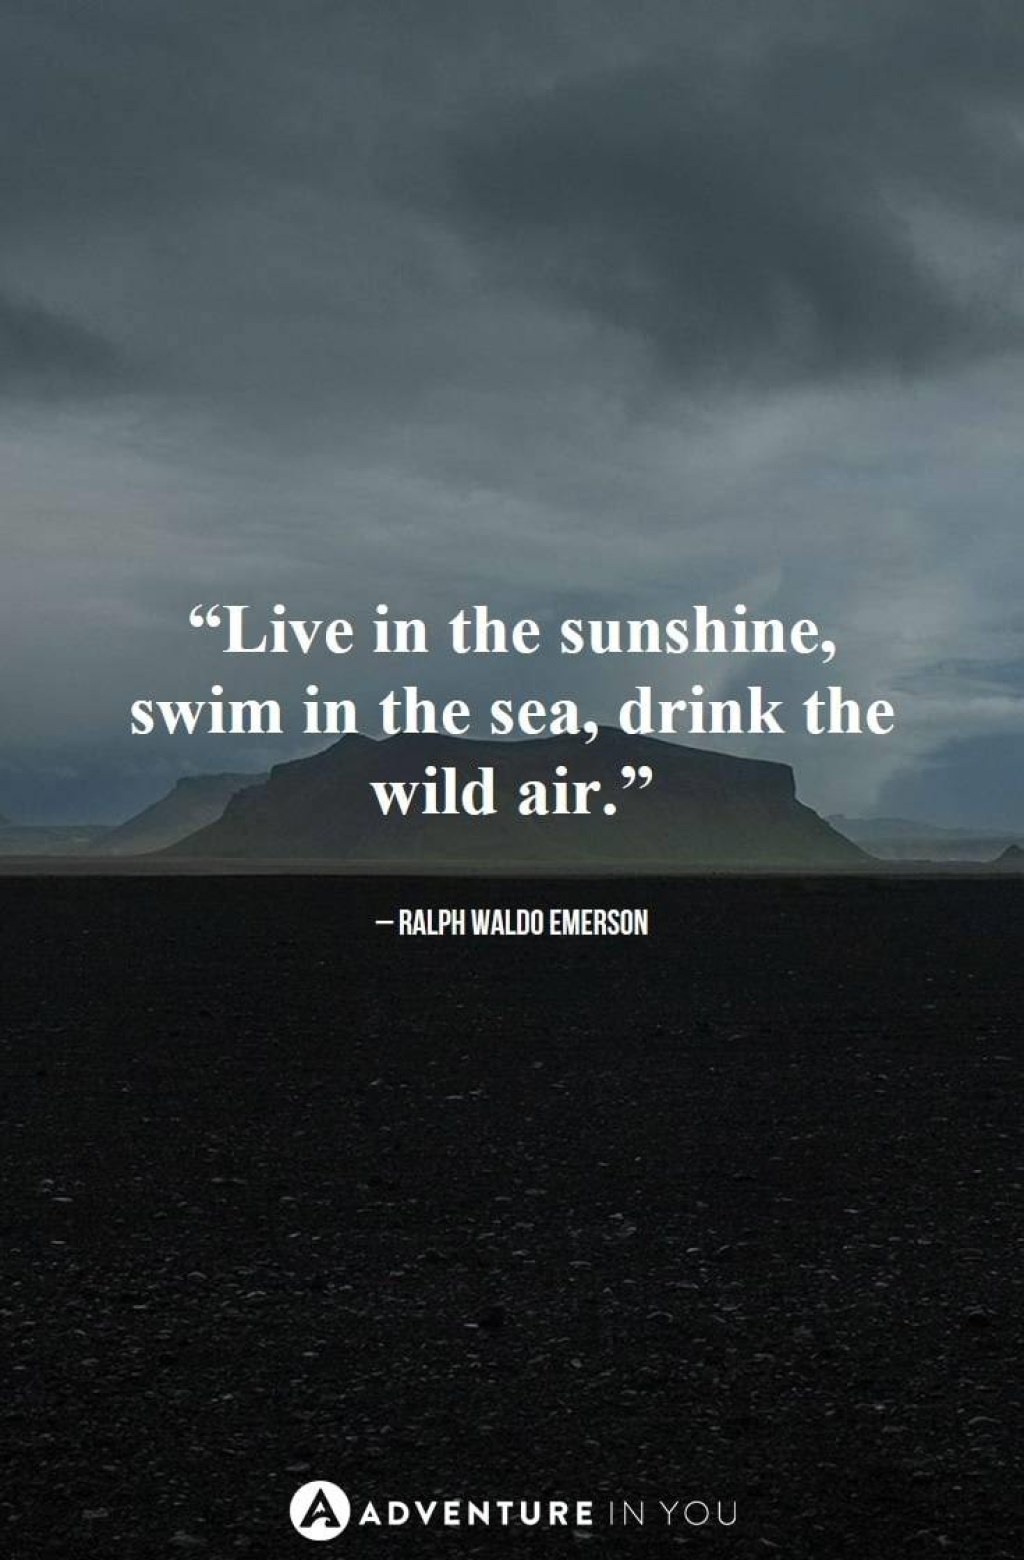 outdoor photo quotes - Inspiring Outdoor Quotes (with Photos!) to Get You Outside